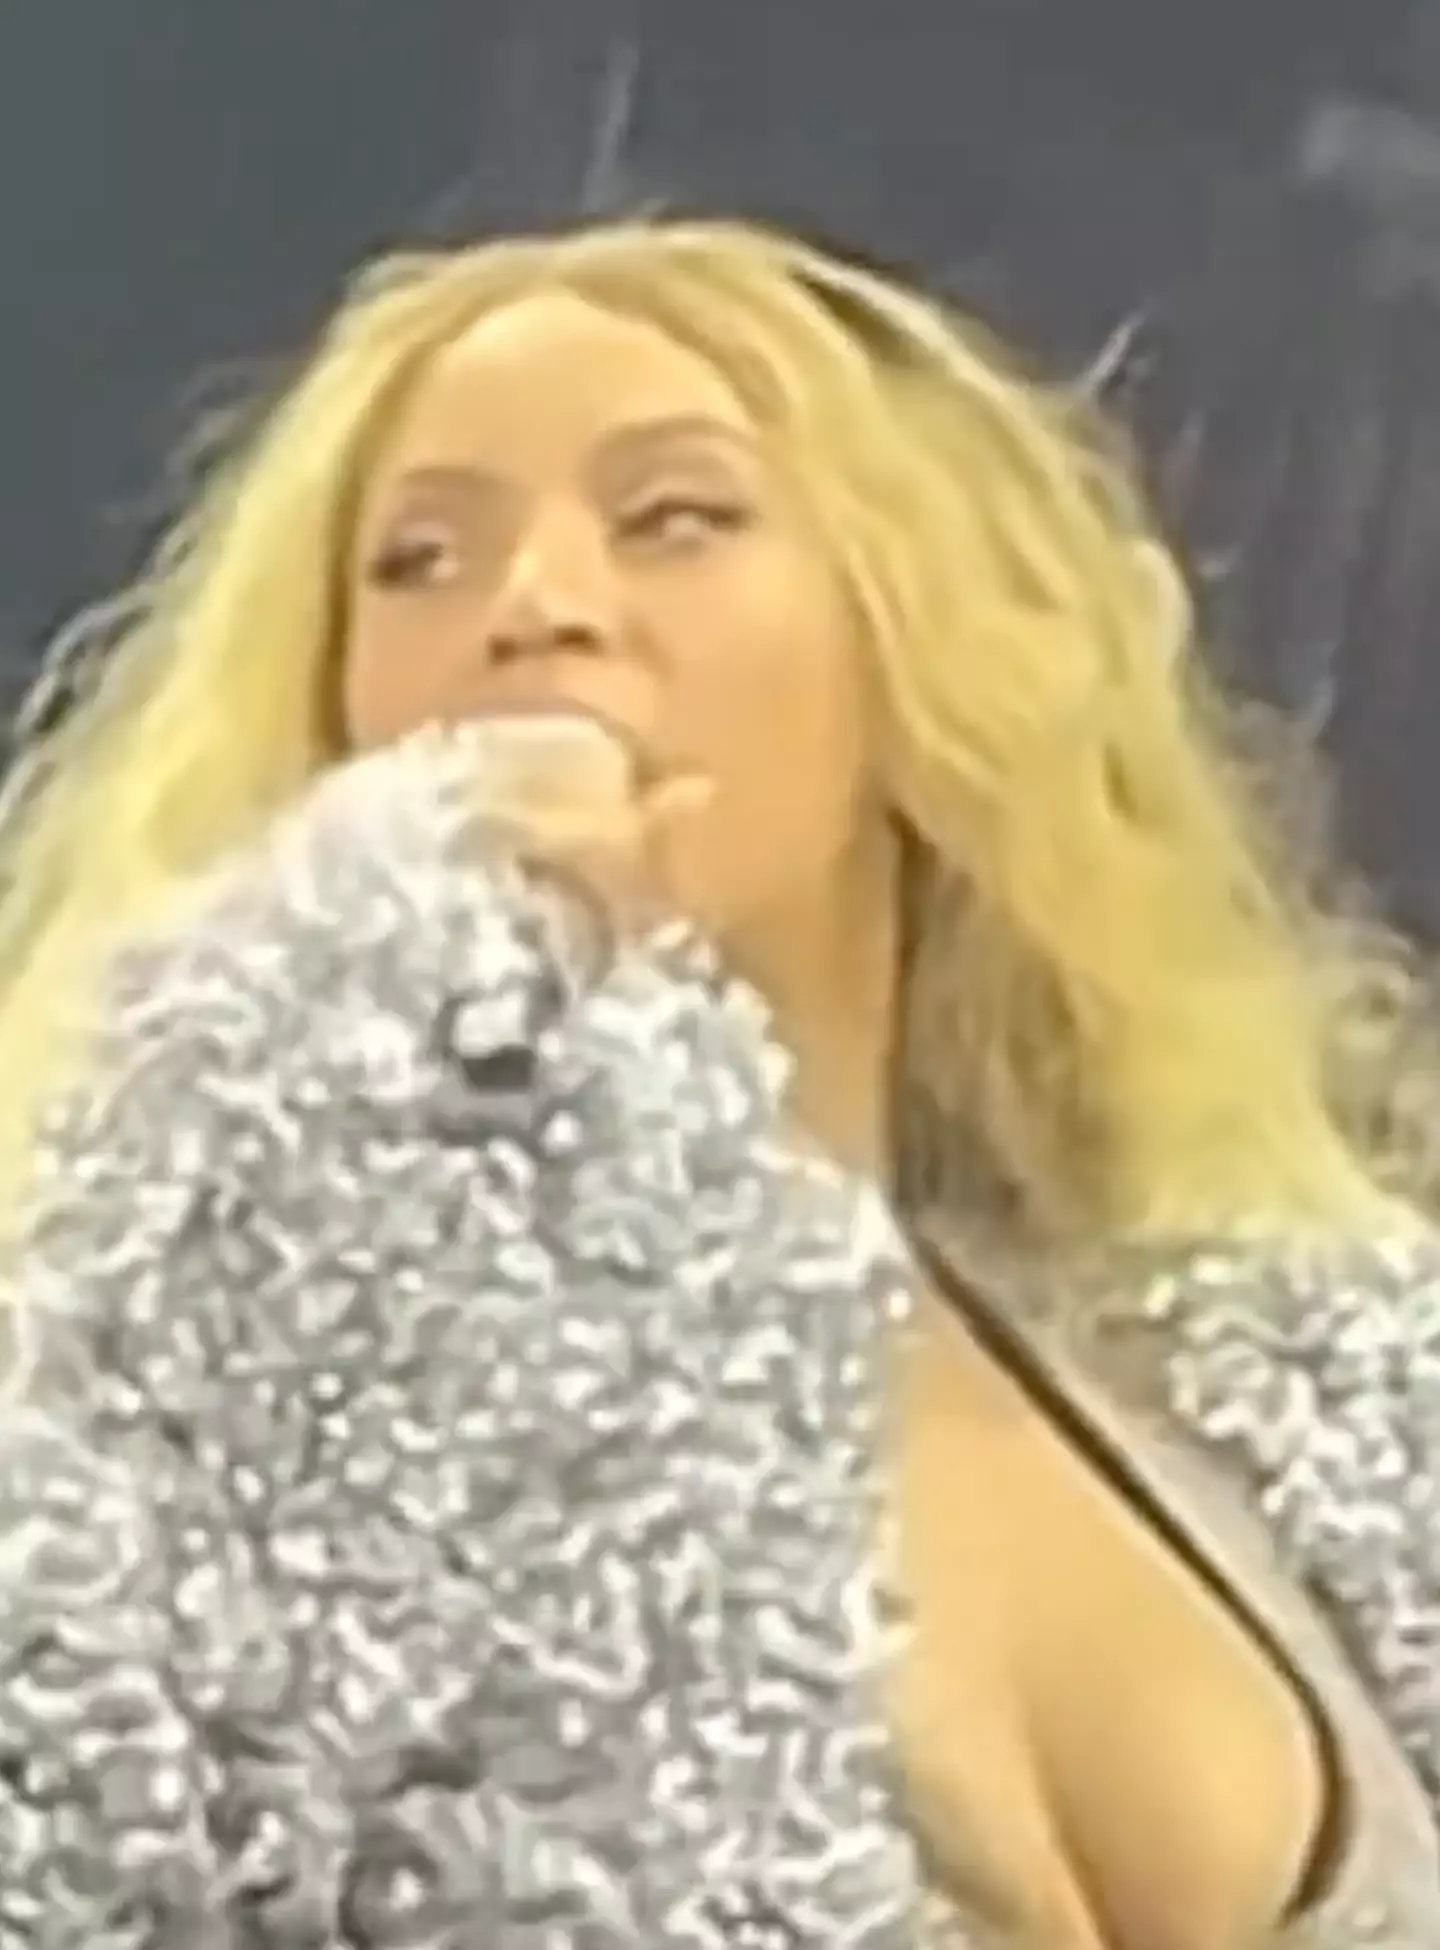 Beyonce appeared to mouth 'oh my God' shortly after the prop horse fiasco.